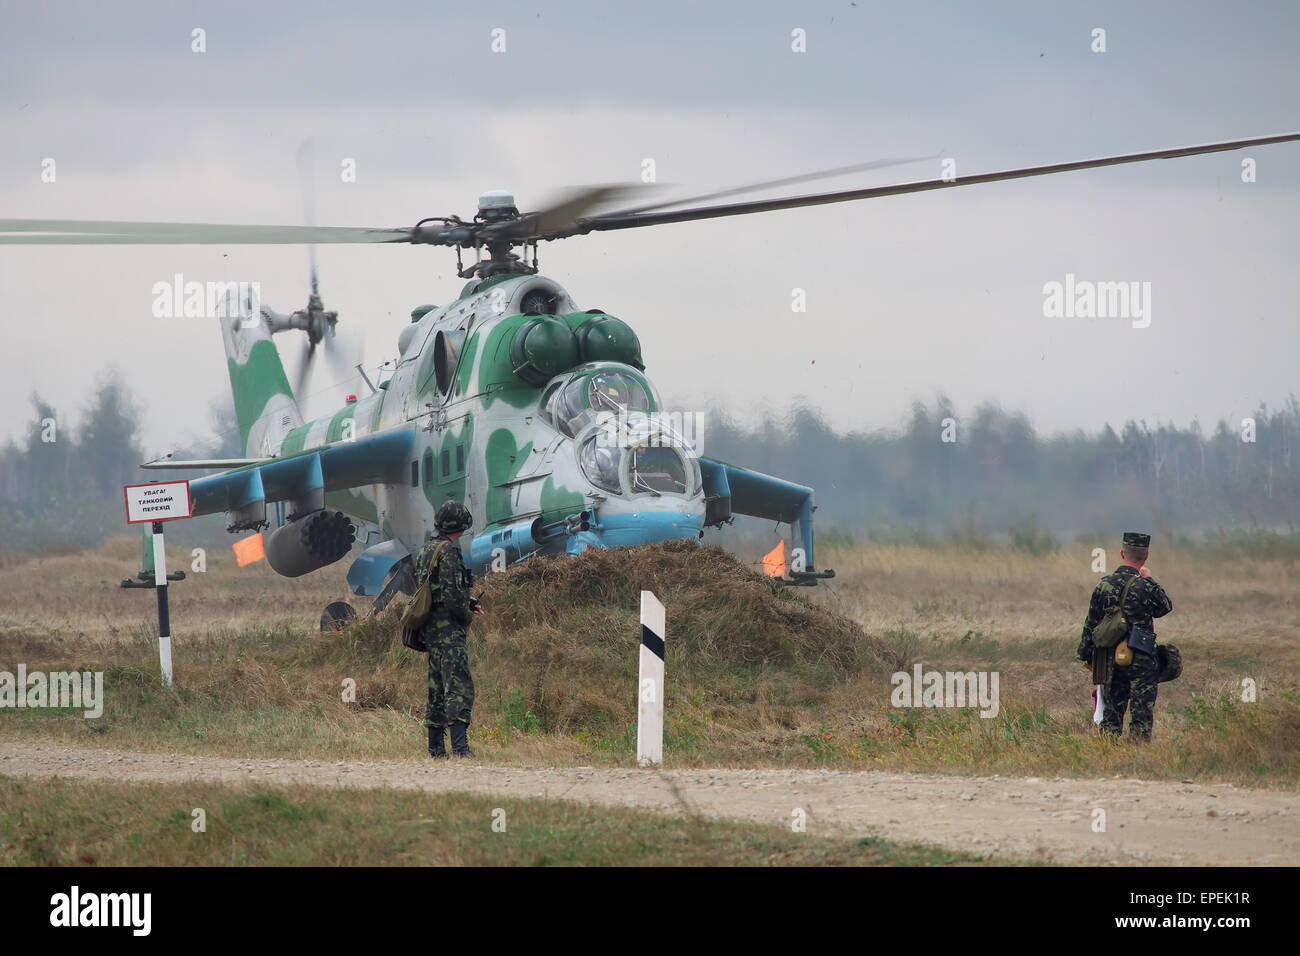 Zhitomir, Ukraine - September 29, 2010: Ukrainian Army Mi-24's Attack Helicopters during military training Stock Photo